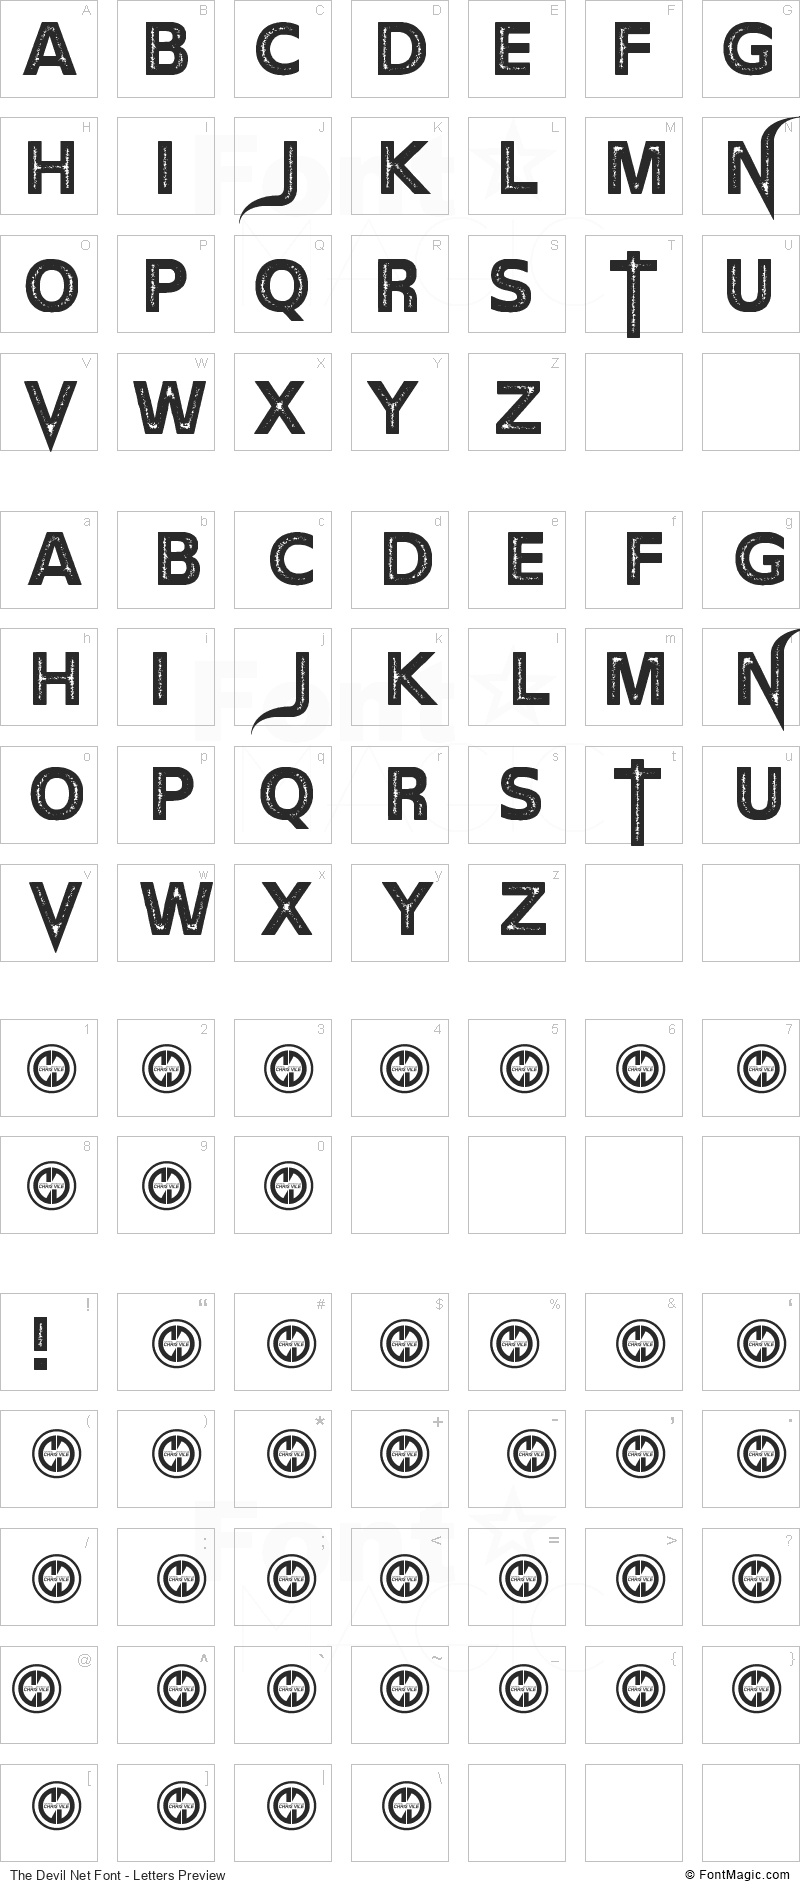 The Devil Net Font - All Latters Preview Chart